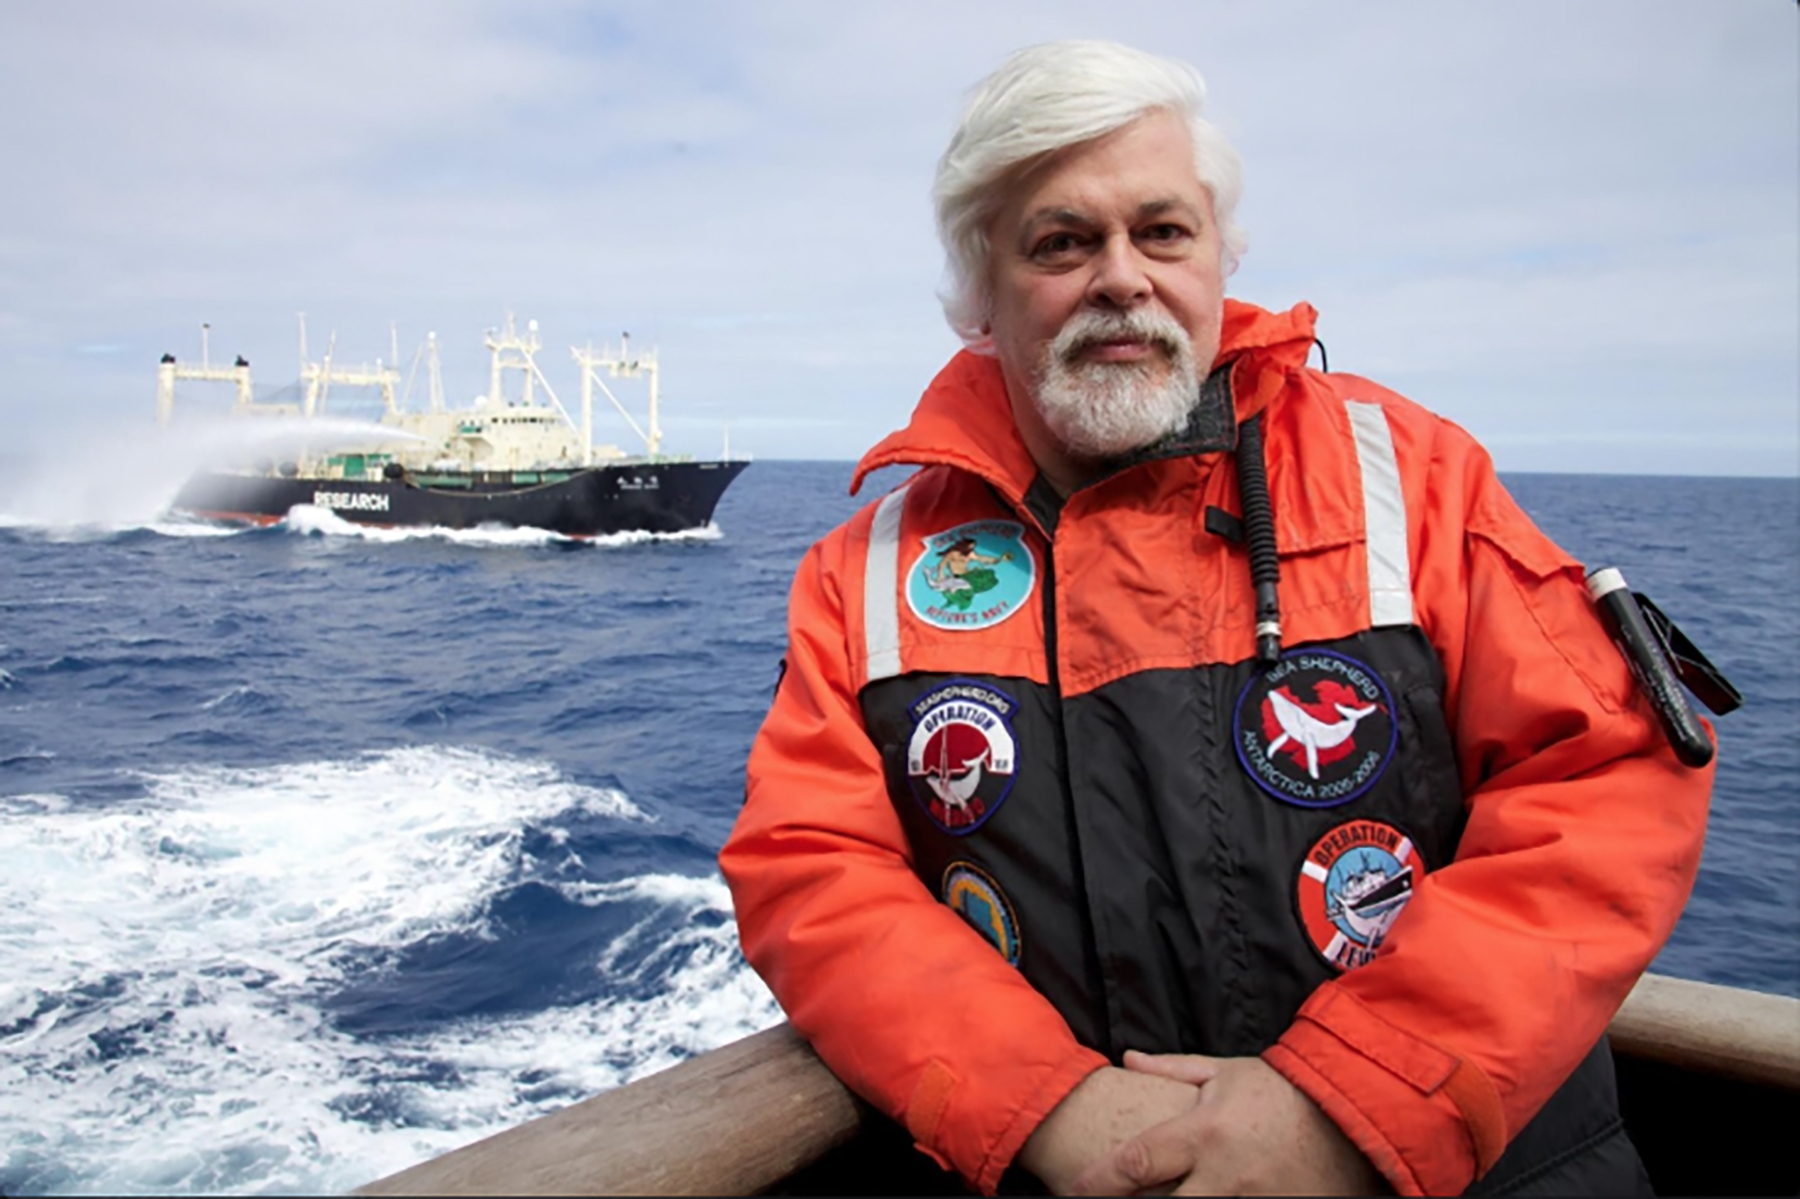 “Watson” is a documentary about Captain Paul Watson, the renegade founder of the Sea Shepherd Conservation Society and a co-founder of Greenpeace.